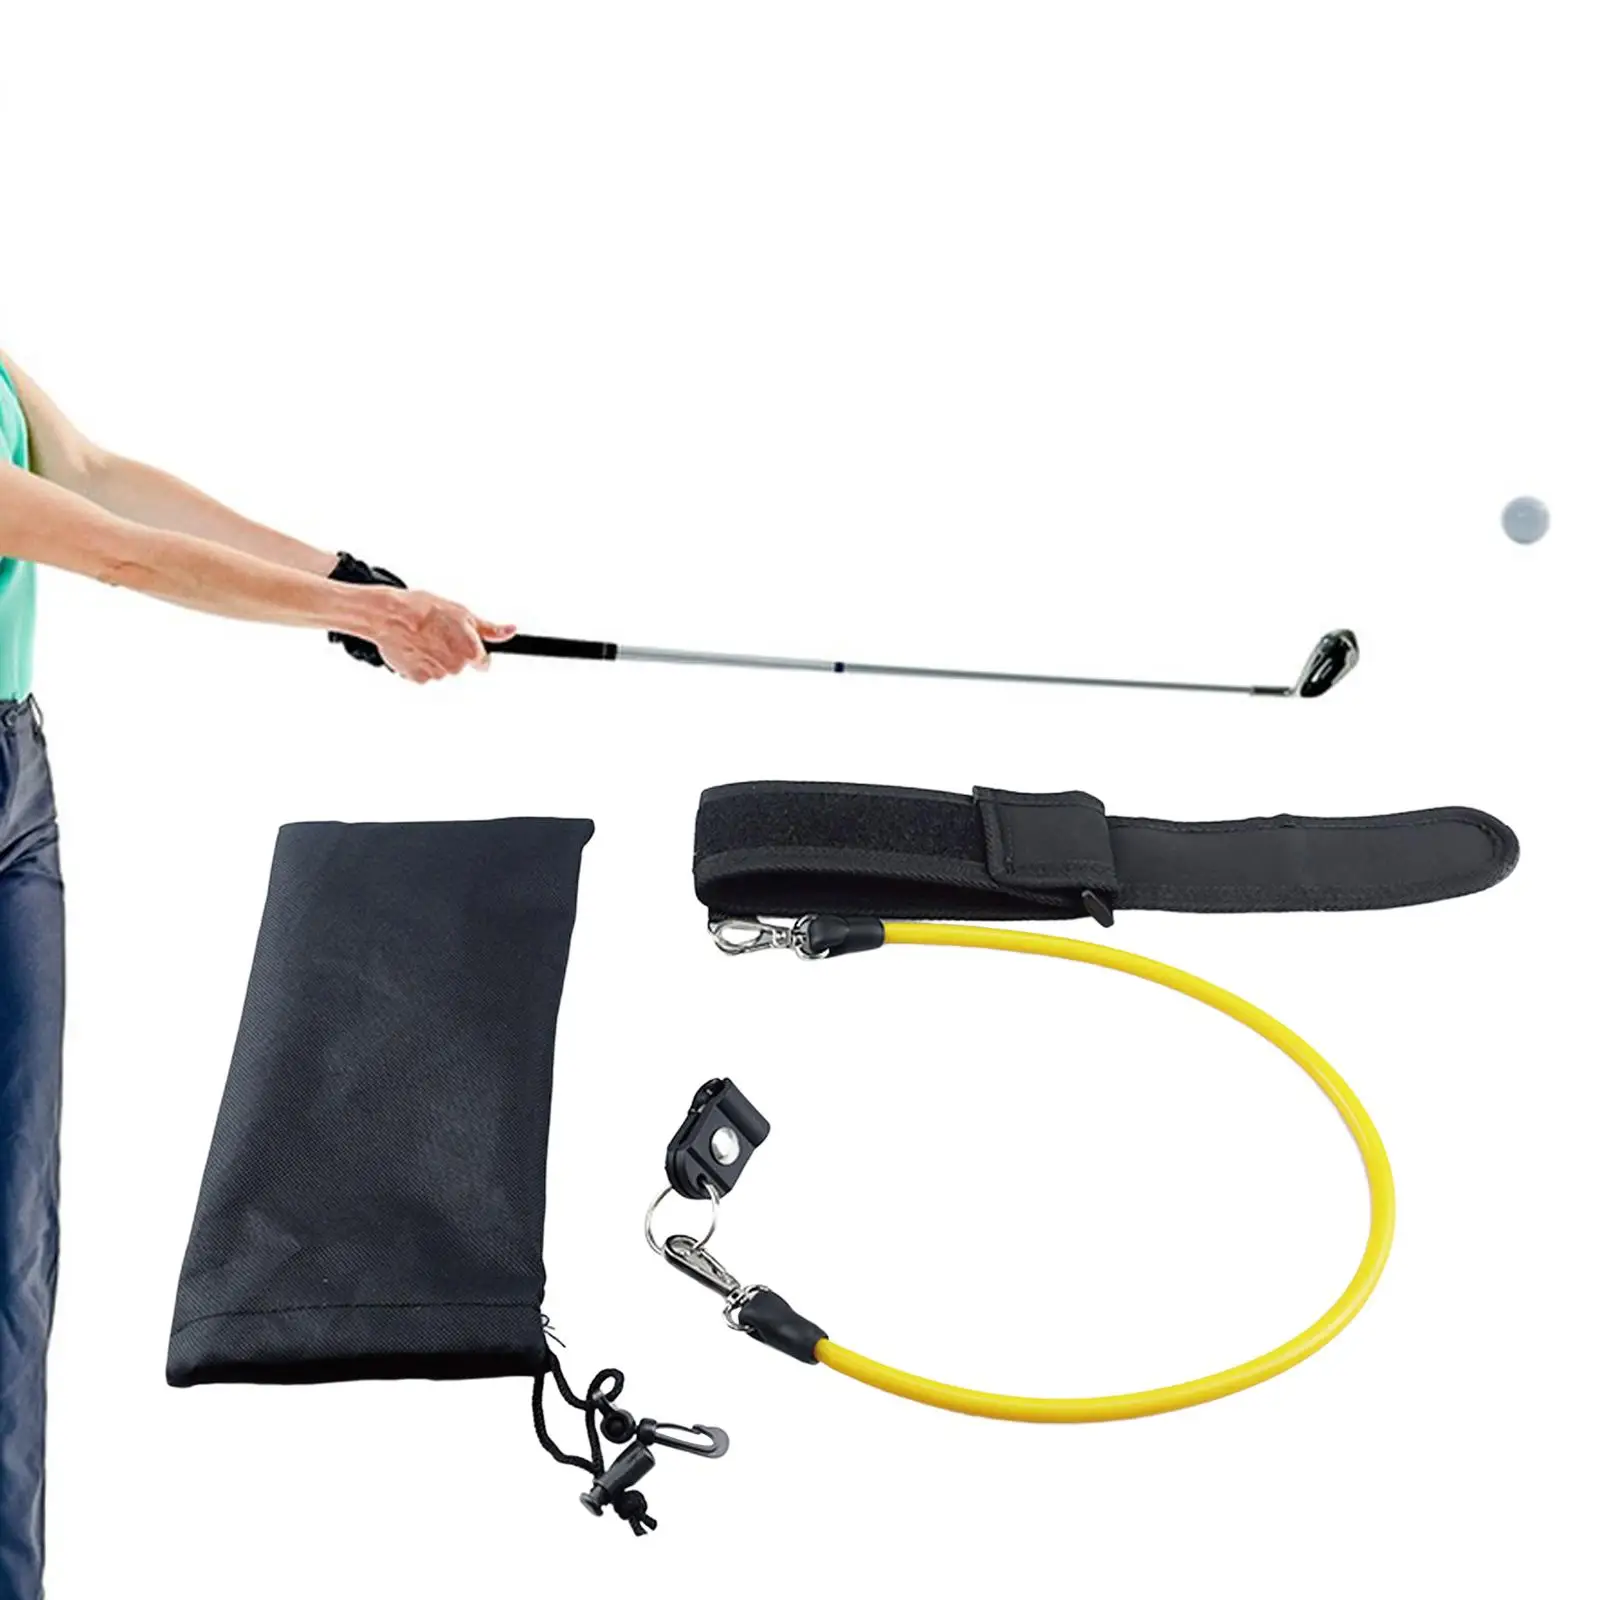 Golf Swing Tension Belt Elastic Cord and Arm Strap Golf Practice Equipment Lightweight with Organizer Bag Accessory Durable